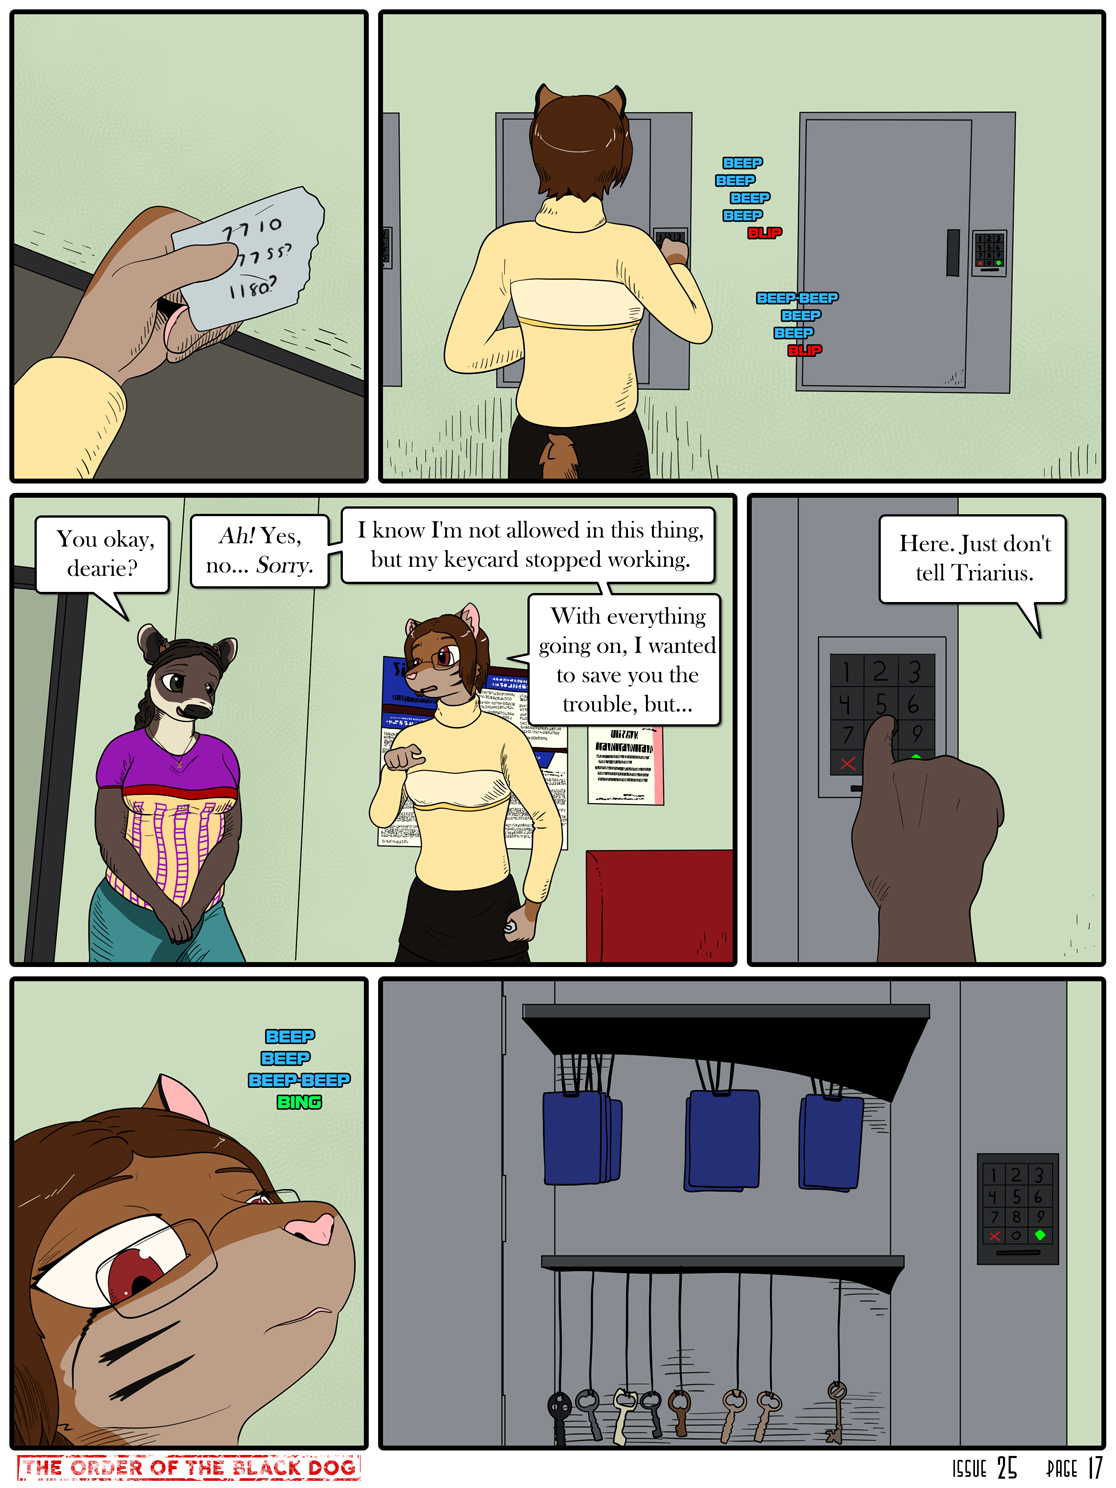 Issue 25, Page 17